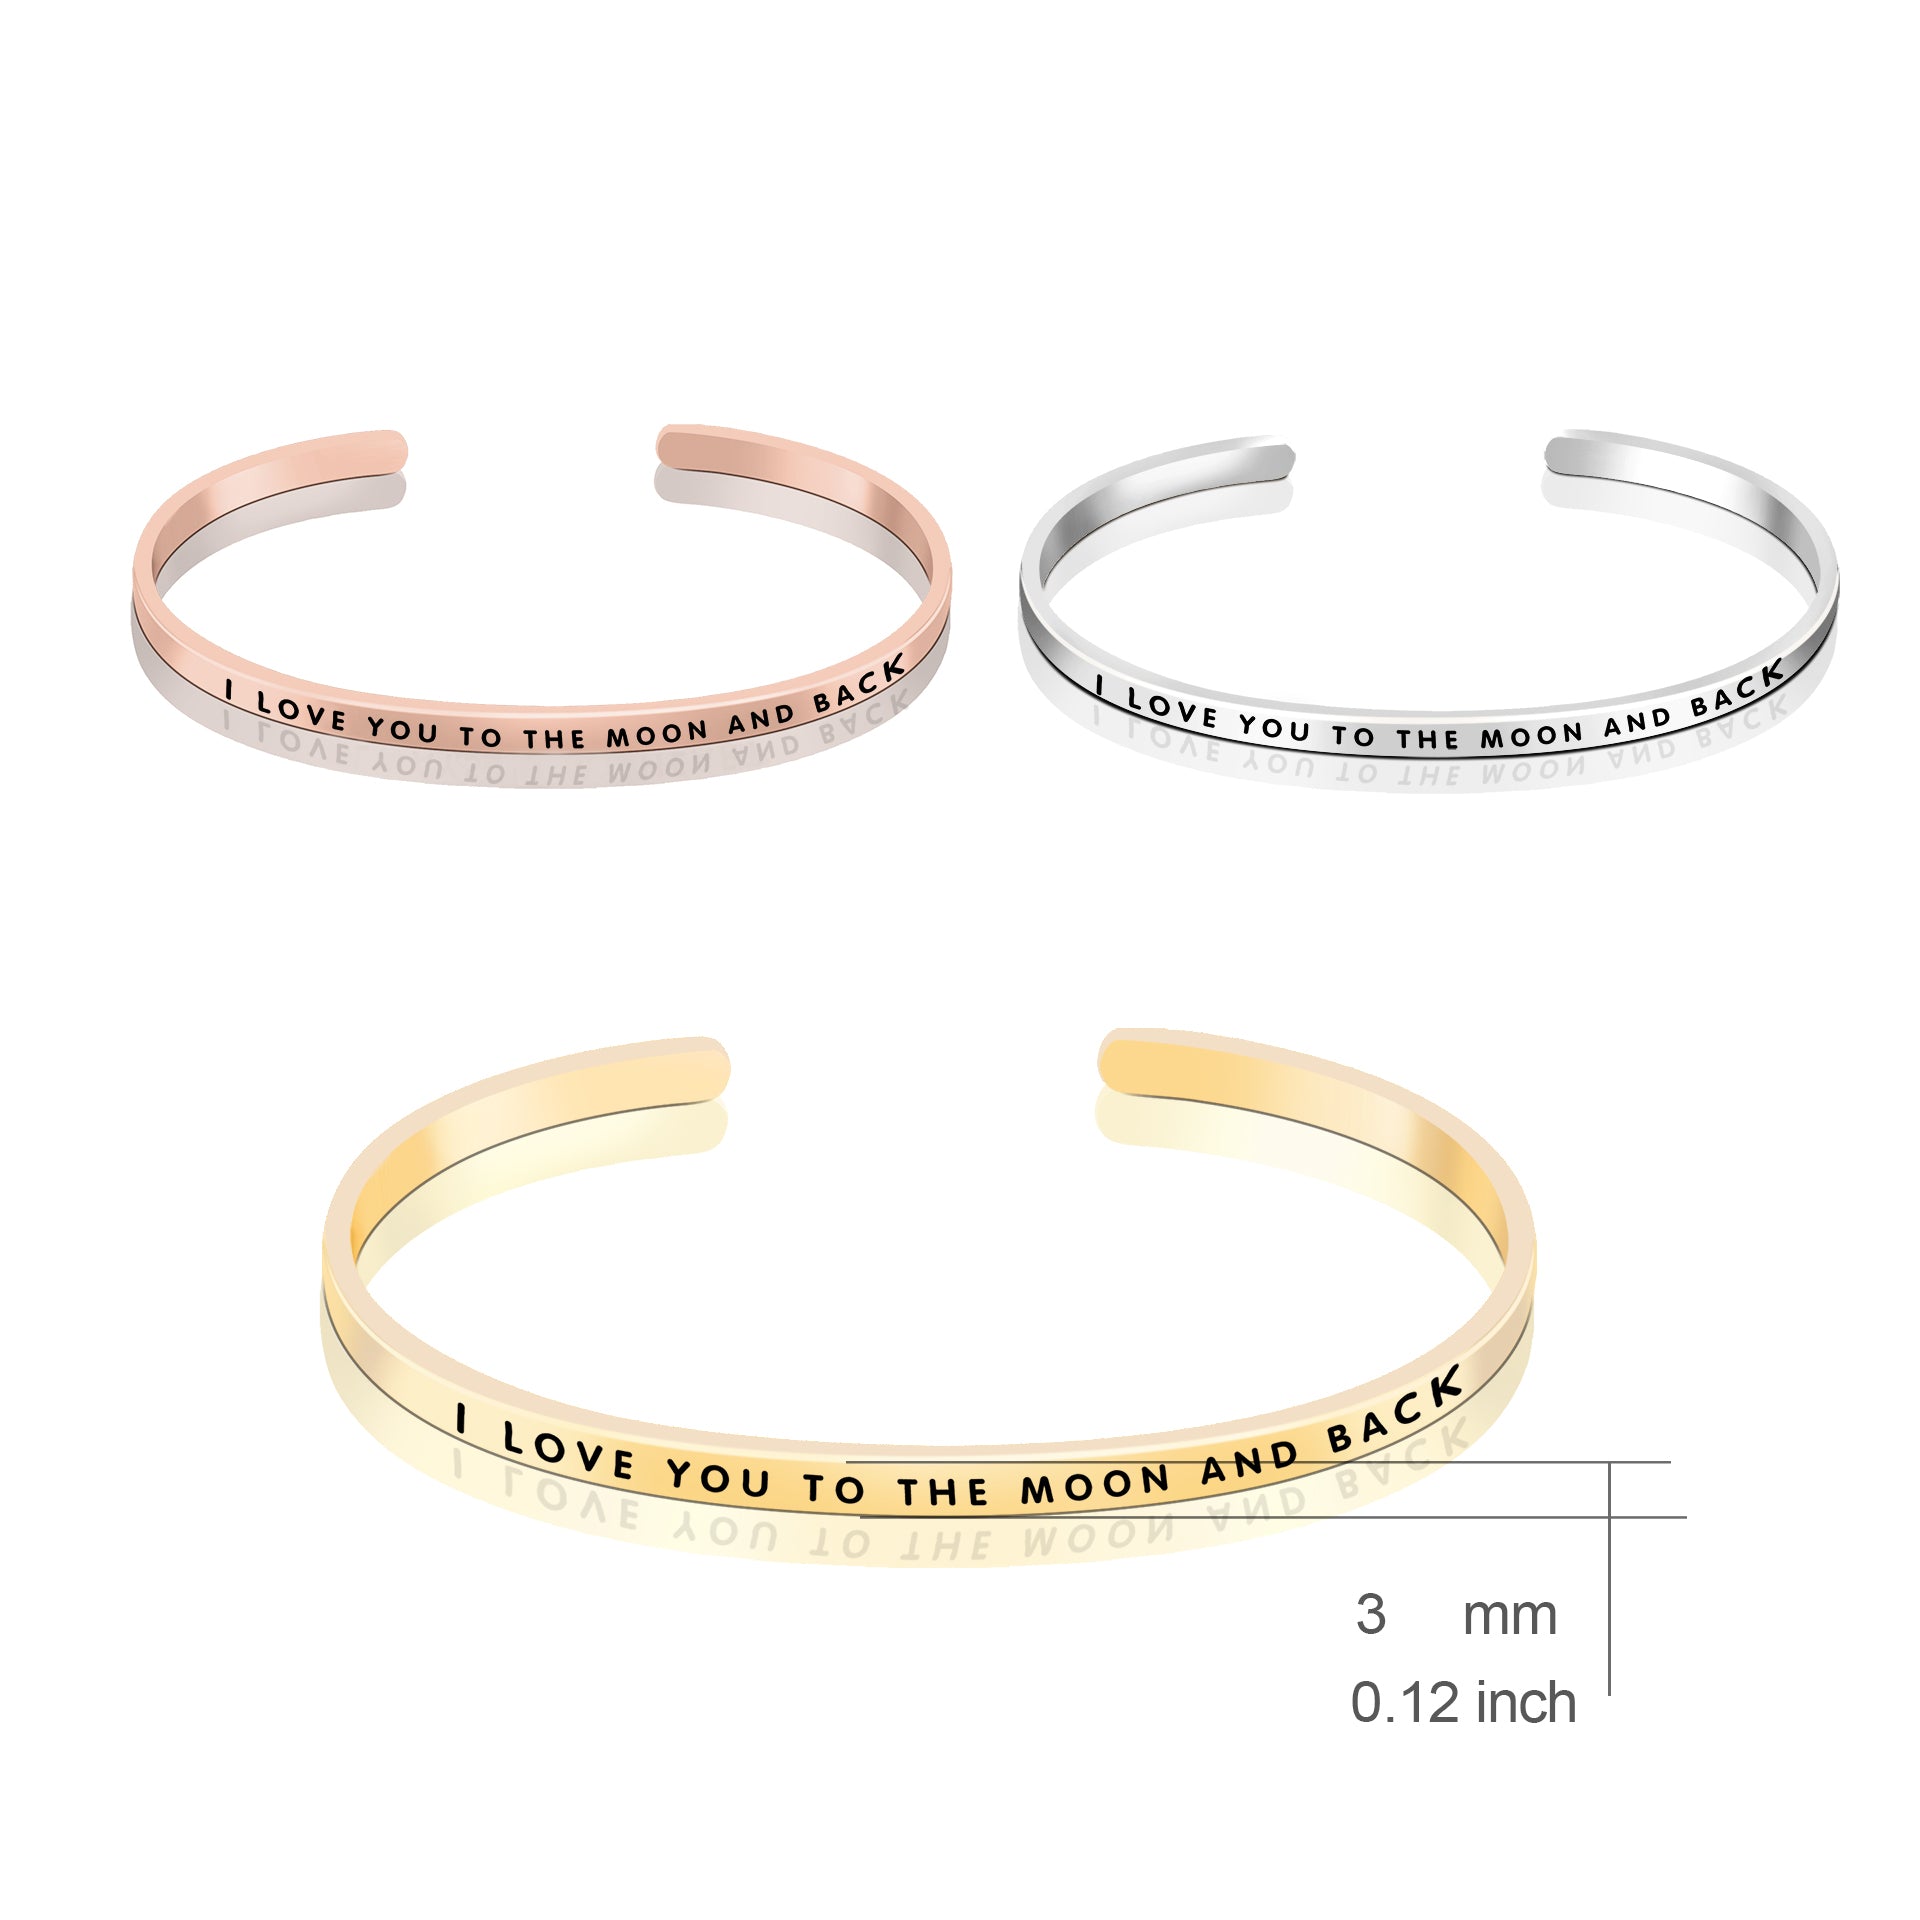 I LOVE YOU TO THE MOON AND THE BACK Bangle Words Engraved Copper Bangle